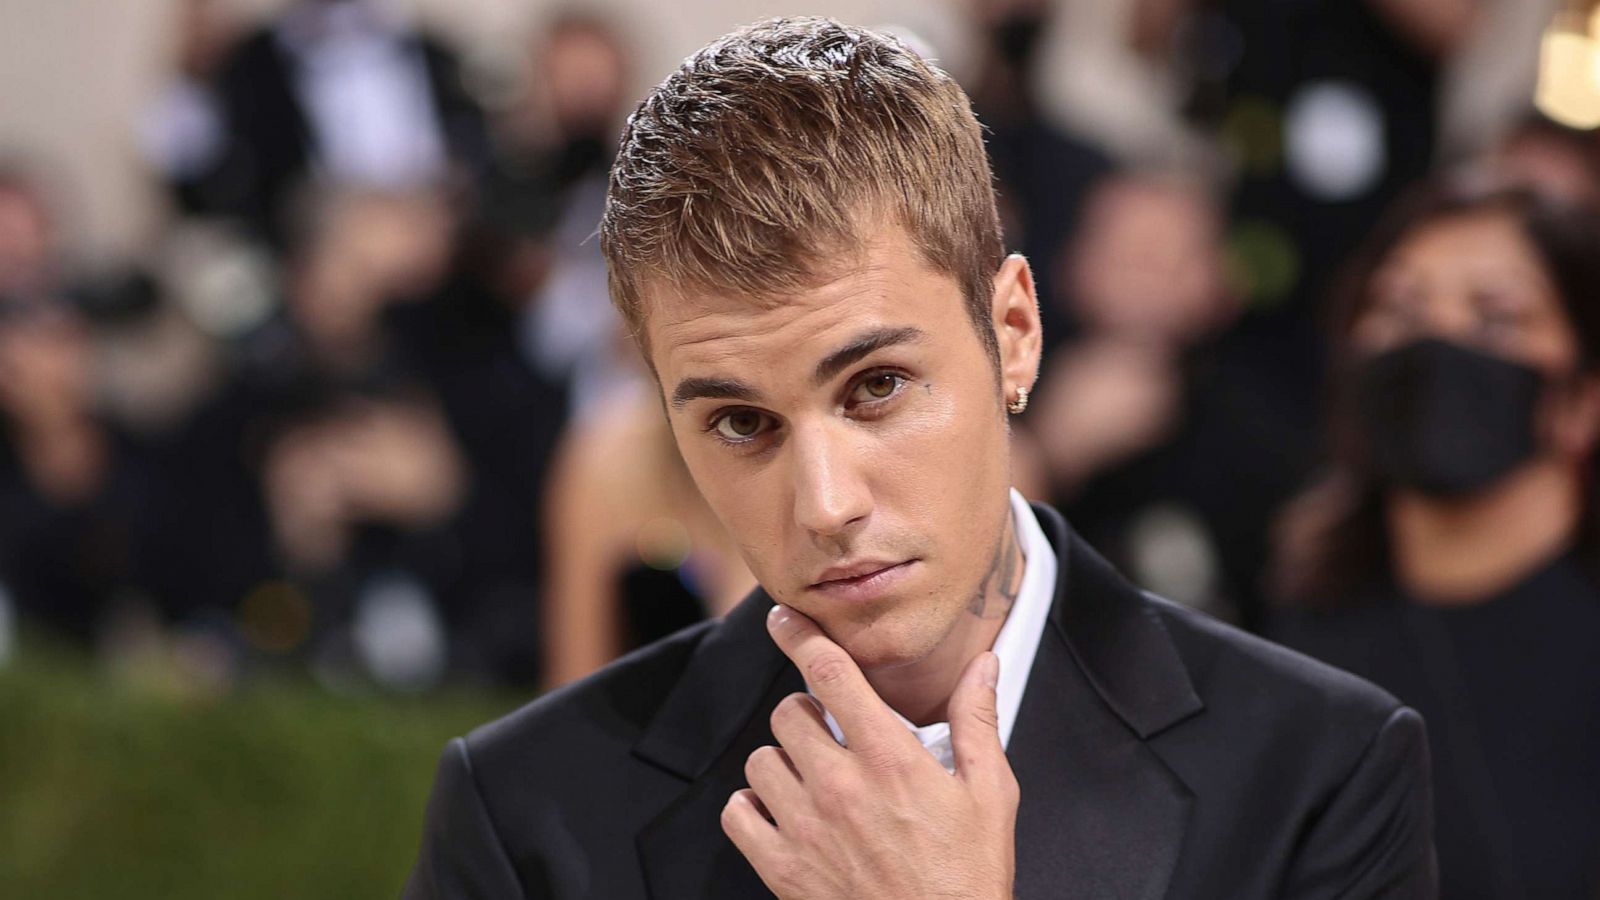 PHOTO: Justin Bieber attends The 2021 Met Gala at Metropolitan Museum of Art on Sept. 13, 2021 in New York City.